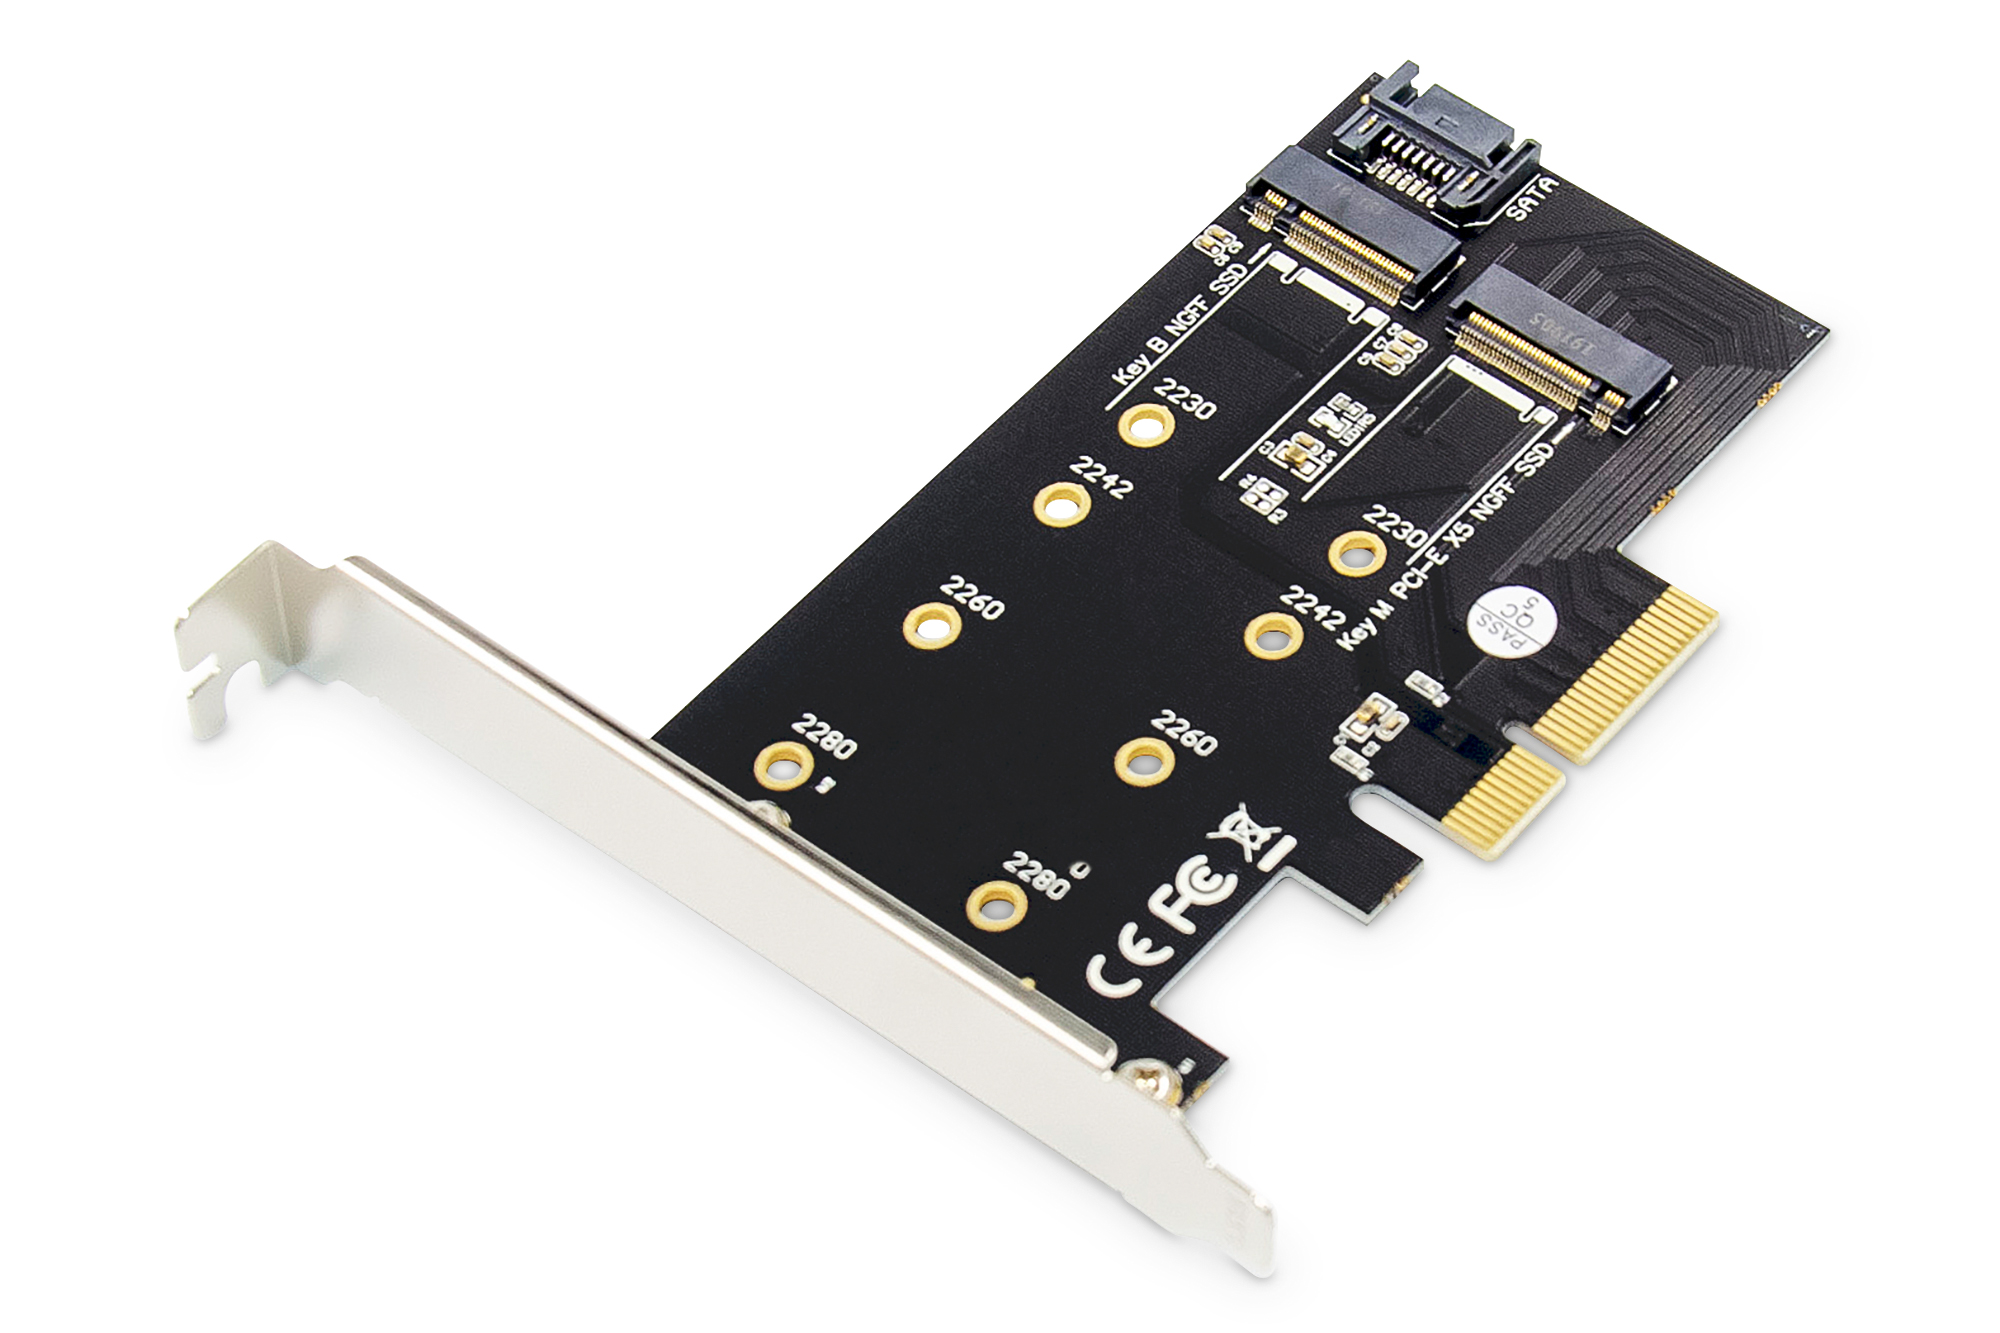 SSD M.2 carte PCIe , Dual M2 NVME (M Key) and SATA (B Key) PCI-e 3.0 x 4  Host Controller Expansion Card Adapter Reader, Support NGFF 22x110,22x80,  22x60, 22x42 with Low Profile